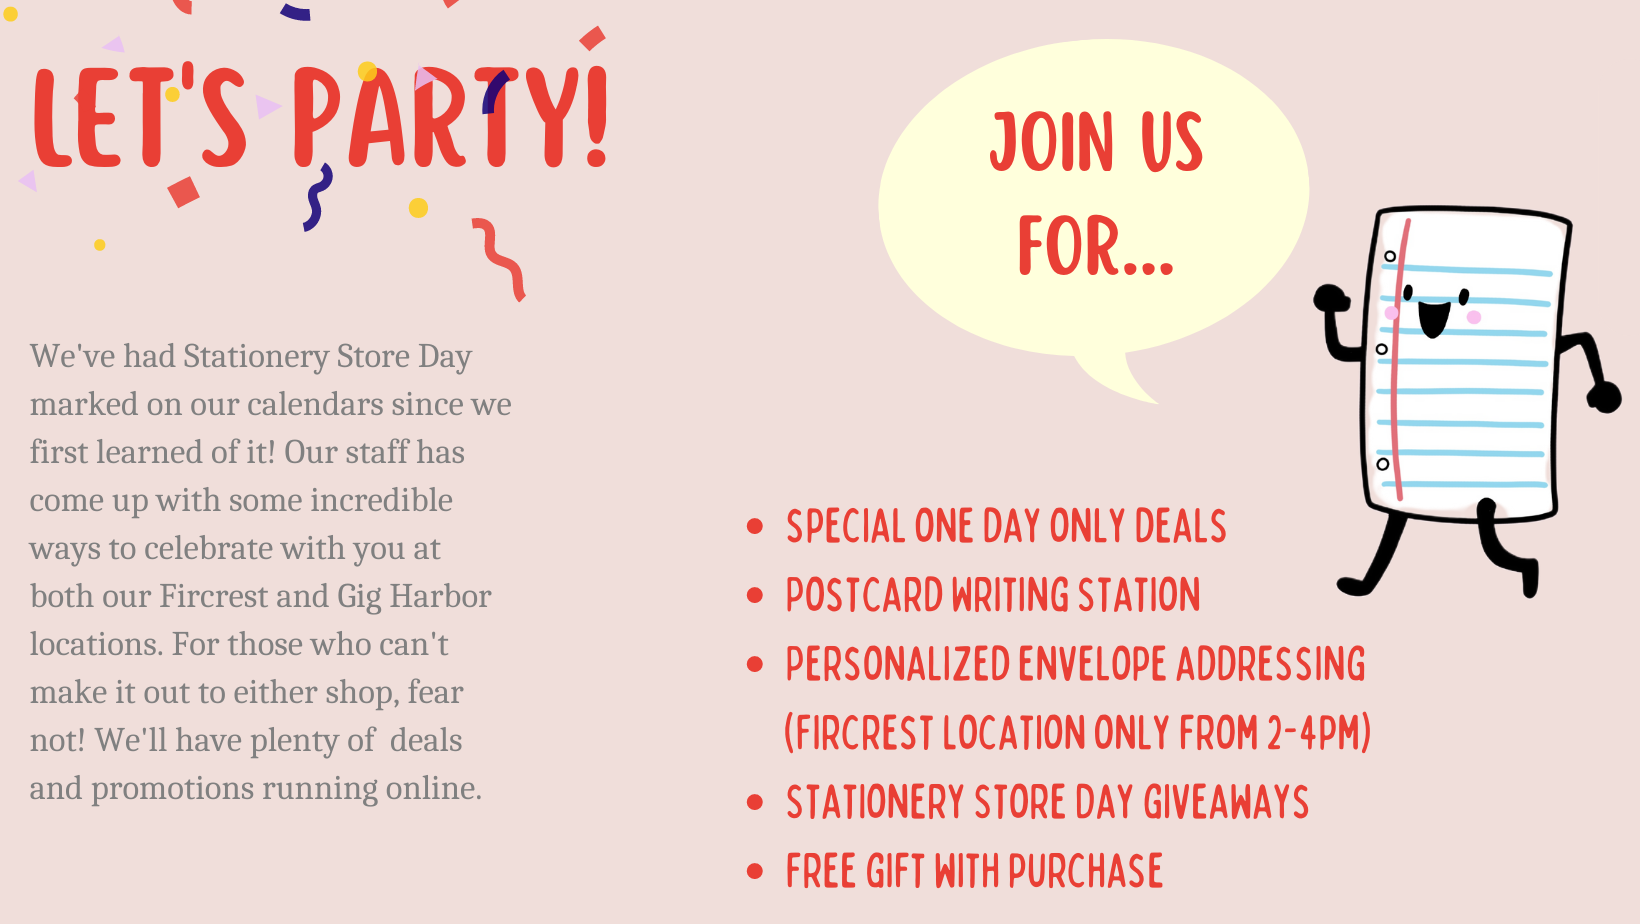 Title reads, "Let's Party!" Join us for deals, a postcard writing station, personalized envelope addressing, giveaways, and a free gift with purchase. 